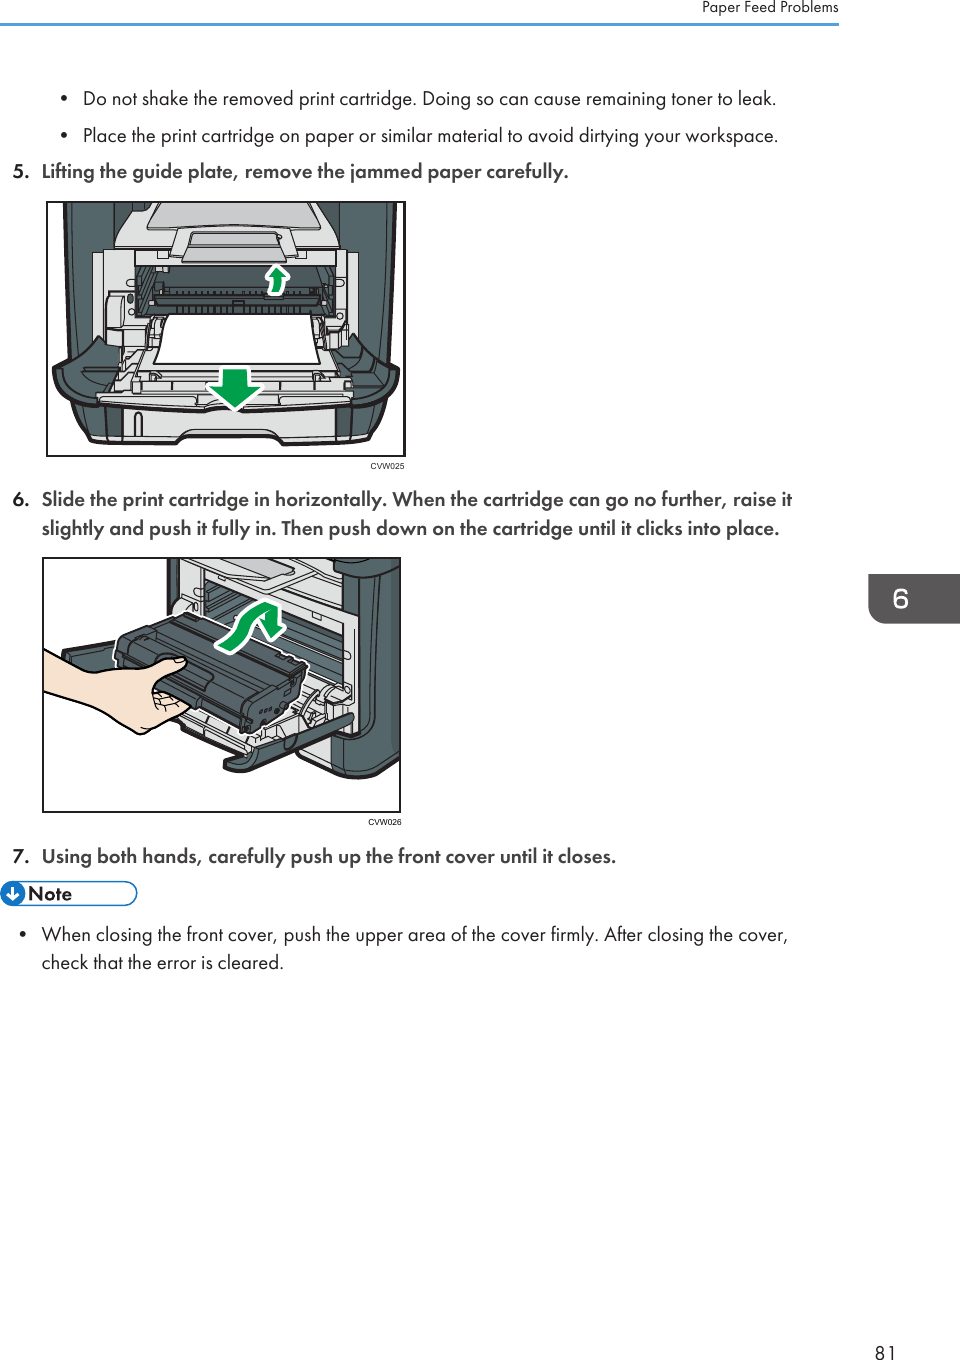 • Do not shake the removed print cartridge. Doing so can cause remaining toner to leak.•Place the print cartridge on paper or similar material to avoid dirtying your workspace.5. Lifting the guide plate, remove the jammed paper carefully.CVW0256. Slide the print cartridge in horizontally. When the cartridge can go no further, raise itslightly and push it fully in. Then push down on the cartridge until it clicks into place.CVW0267. Using both hands, carefully push up the front cover until it closes.• When closing the front cover, push the upper area of the cover firmly. After closing the cover,check that the error is cleared.Paper Feed Problems81